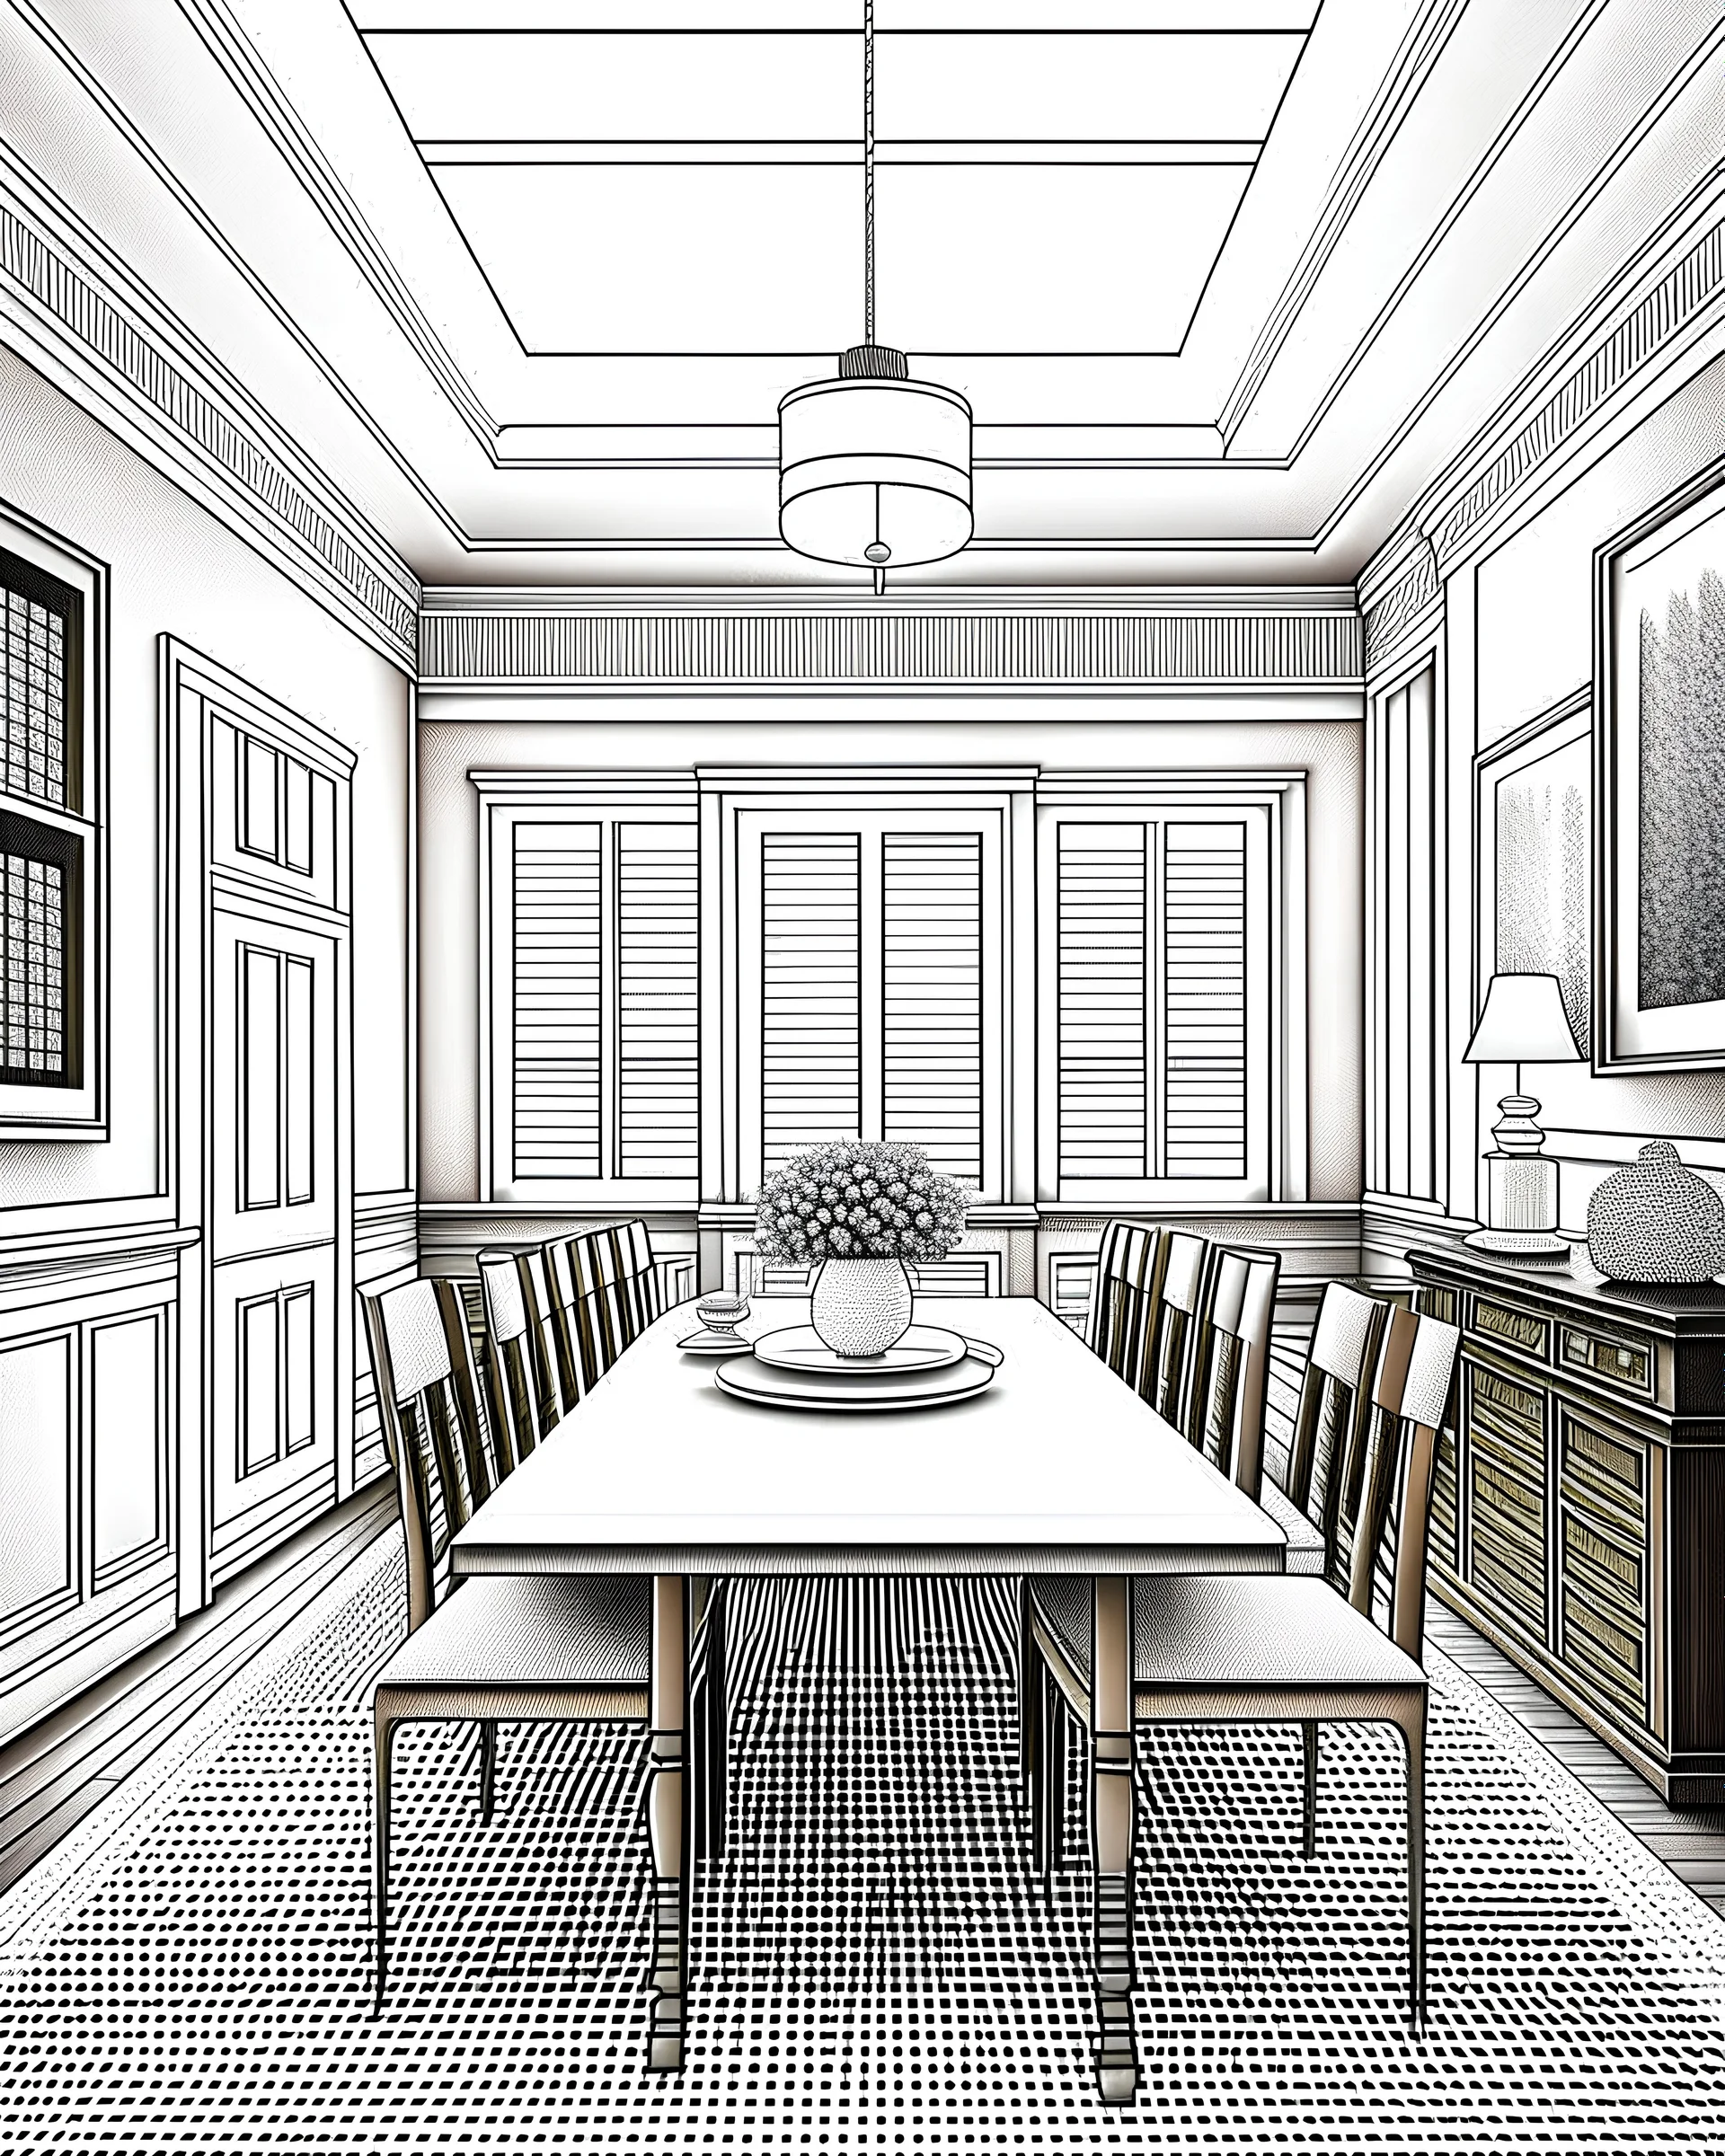 illustration of the dining room interior ,Coloring Book for Adults and Kids, Instant Download, Grayscale Coloring Book